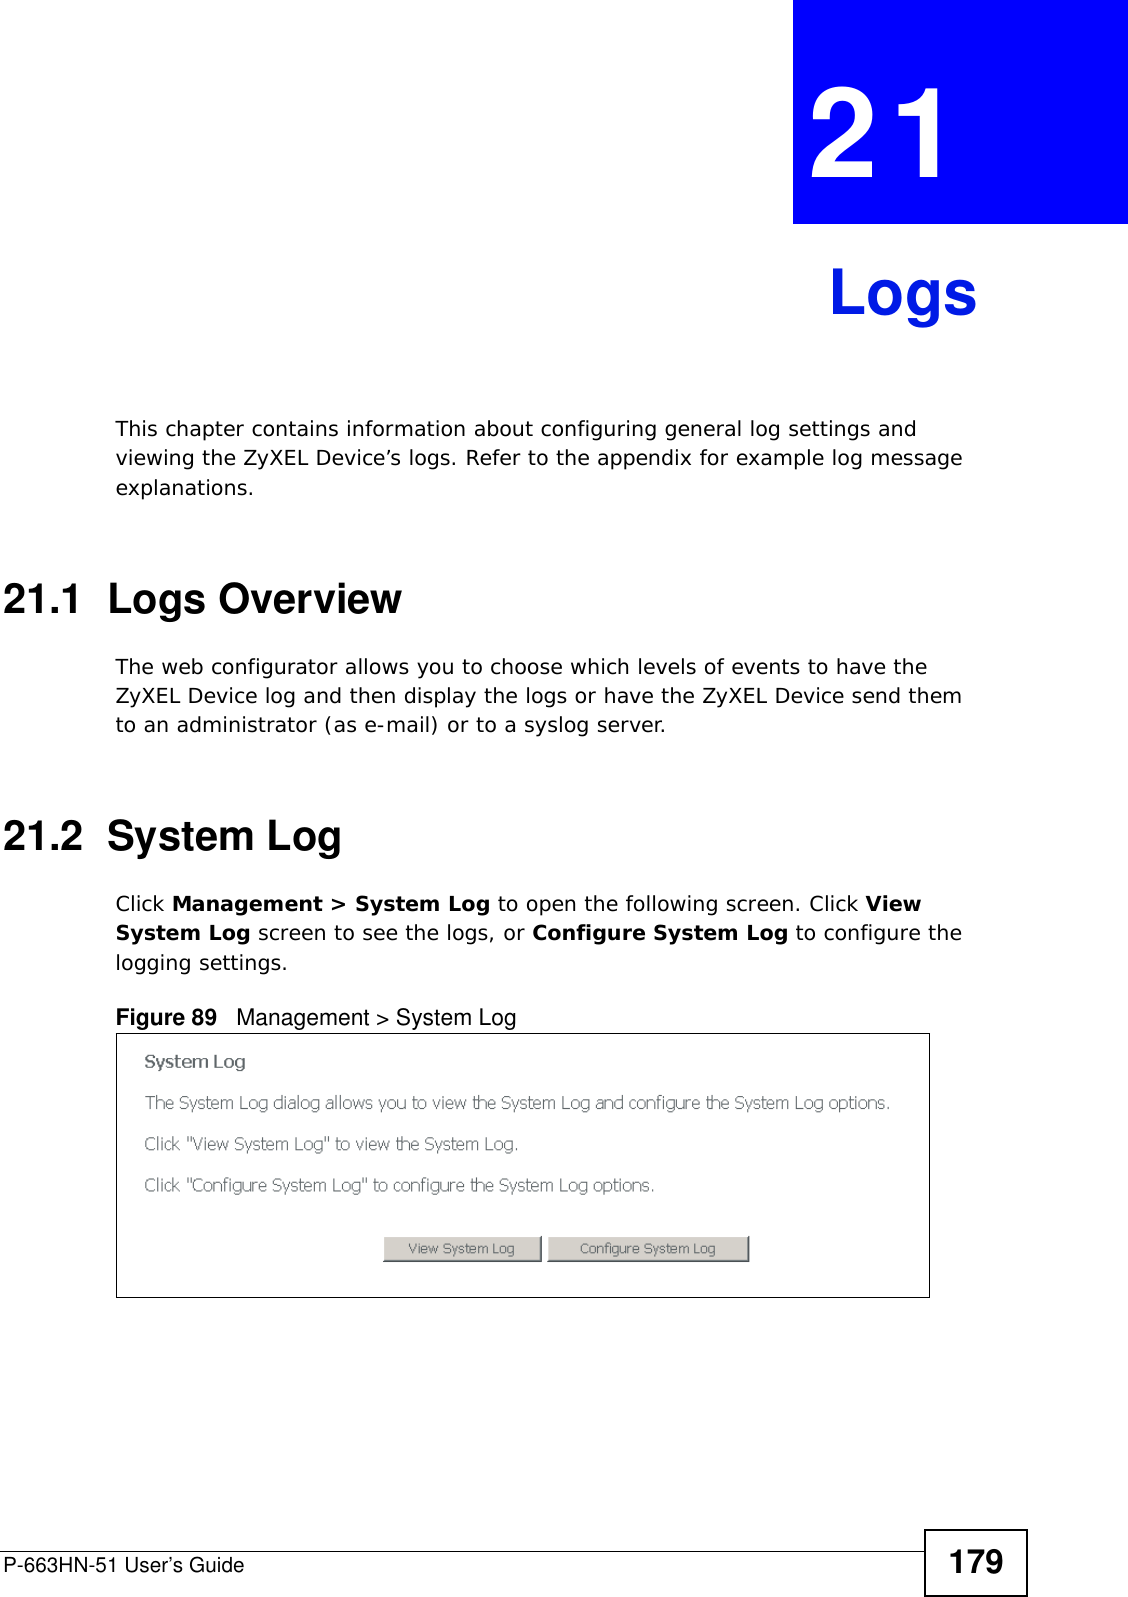 P-663HN-51 User’s Guide 179CHAPTER  21 LogsThis chapter contains information about configuring general log settings and viewing the ZyXEL Device’s logs. Refer to the appendix for example log message explanations.21.1  Logs Overview The web configurator allows you to choose which levels of events to have the ZyXEL Device log and then display the logs or have the ZyXEL Device send them to an administrator (as e-mail) or to a syslog server. 21.2  System LogClick Management &gt; System Log to open the following screen. Click View System Log screen to see the logs, or Configure System Log to configure the logging settings.Figure 89   Management &gt; System Log